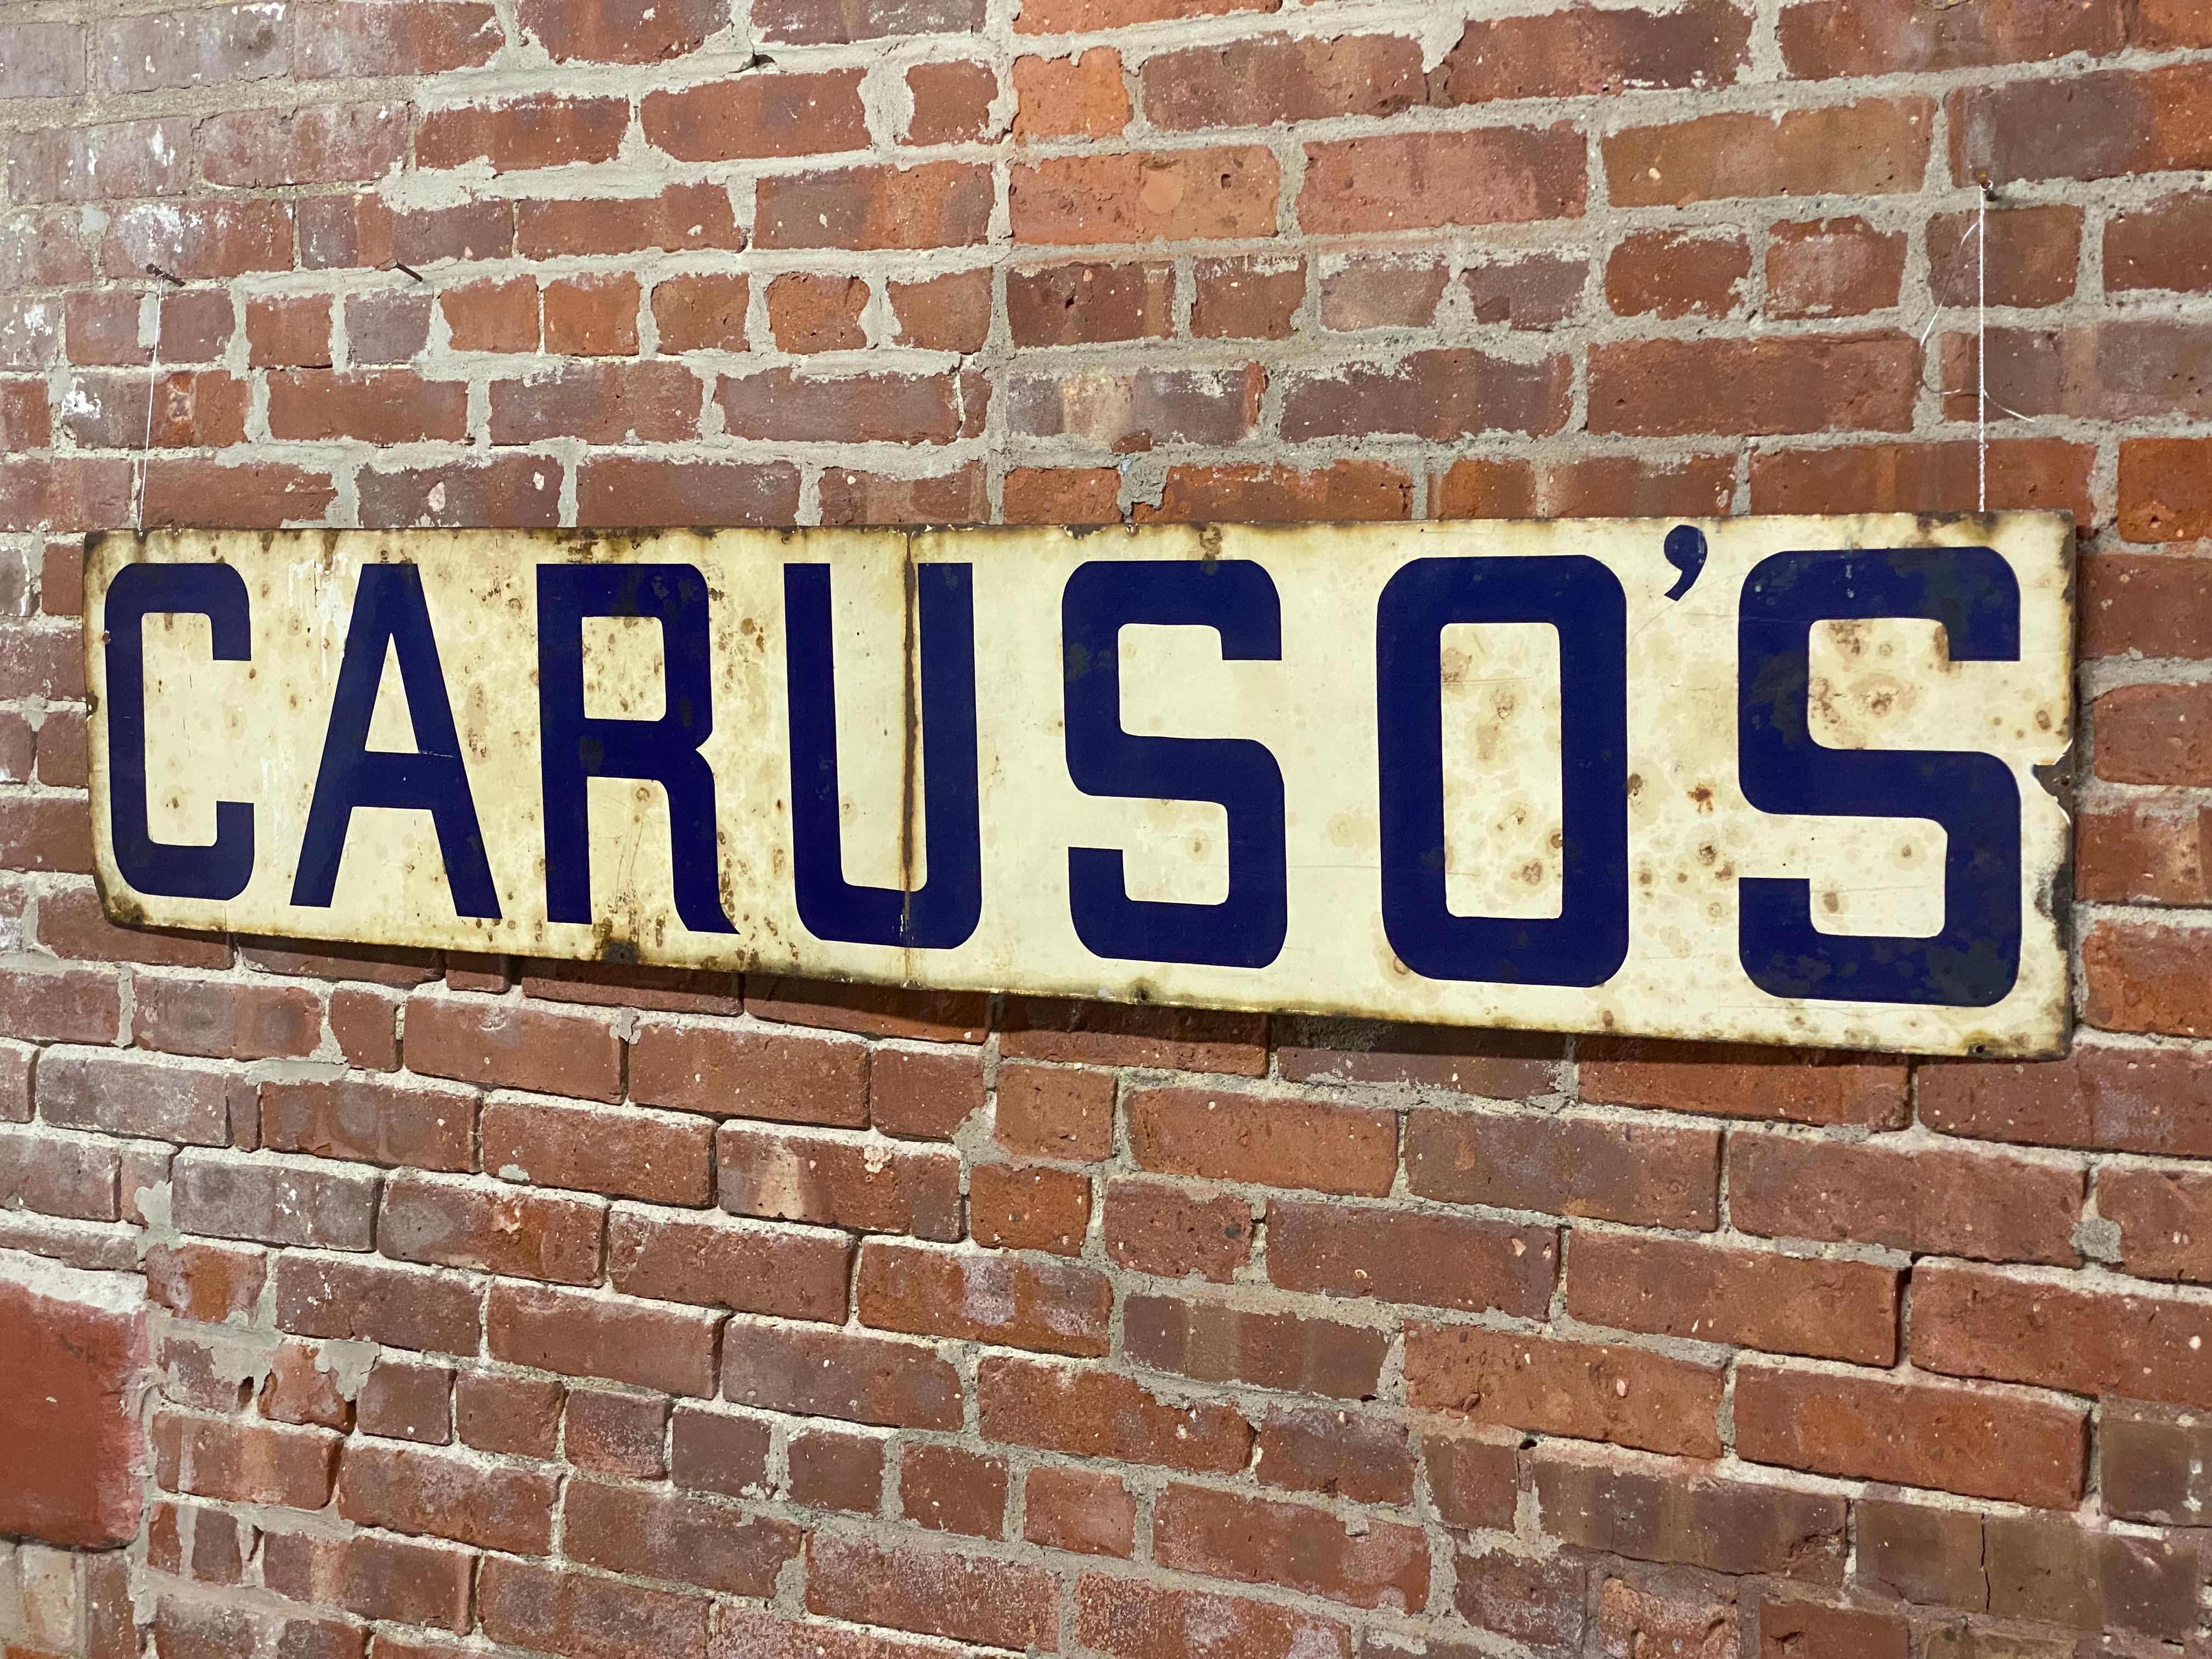 American 1930s Caruso's Old New York Restaurant Enamel Sign For Sale